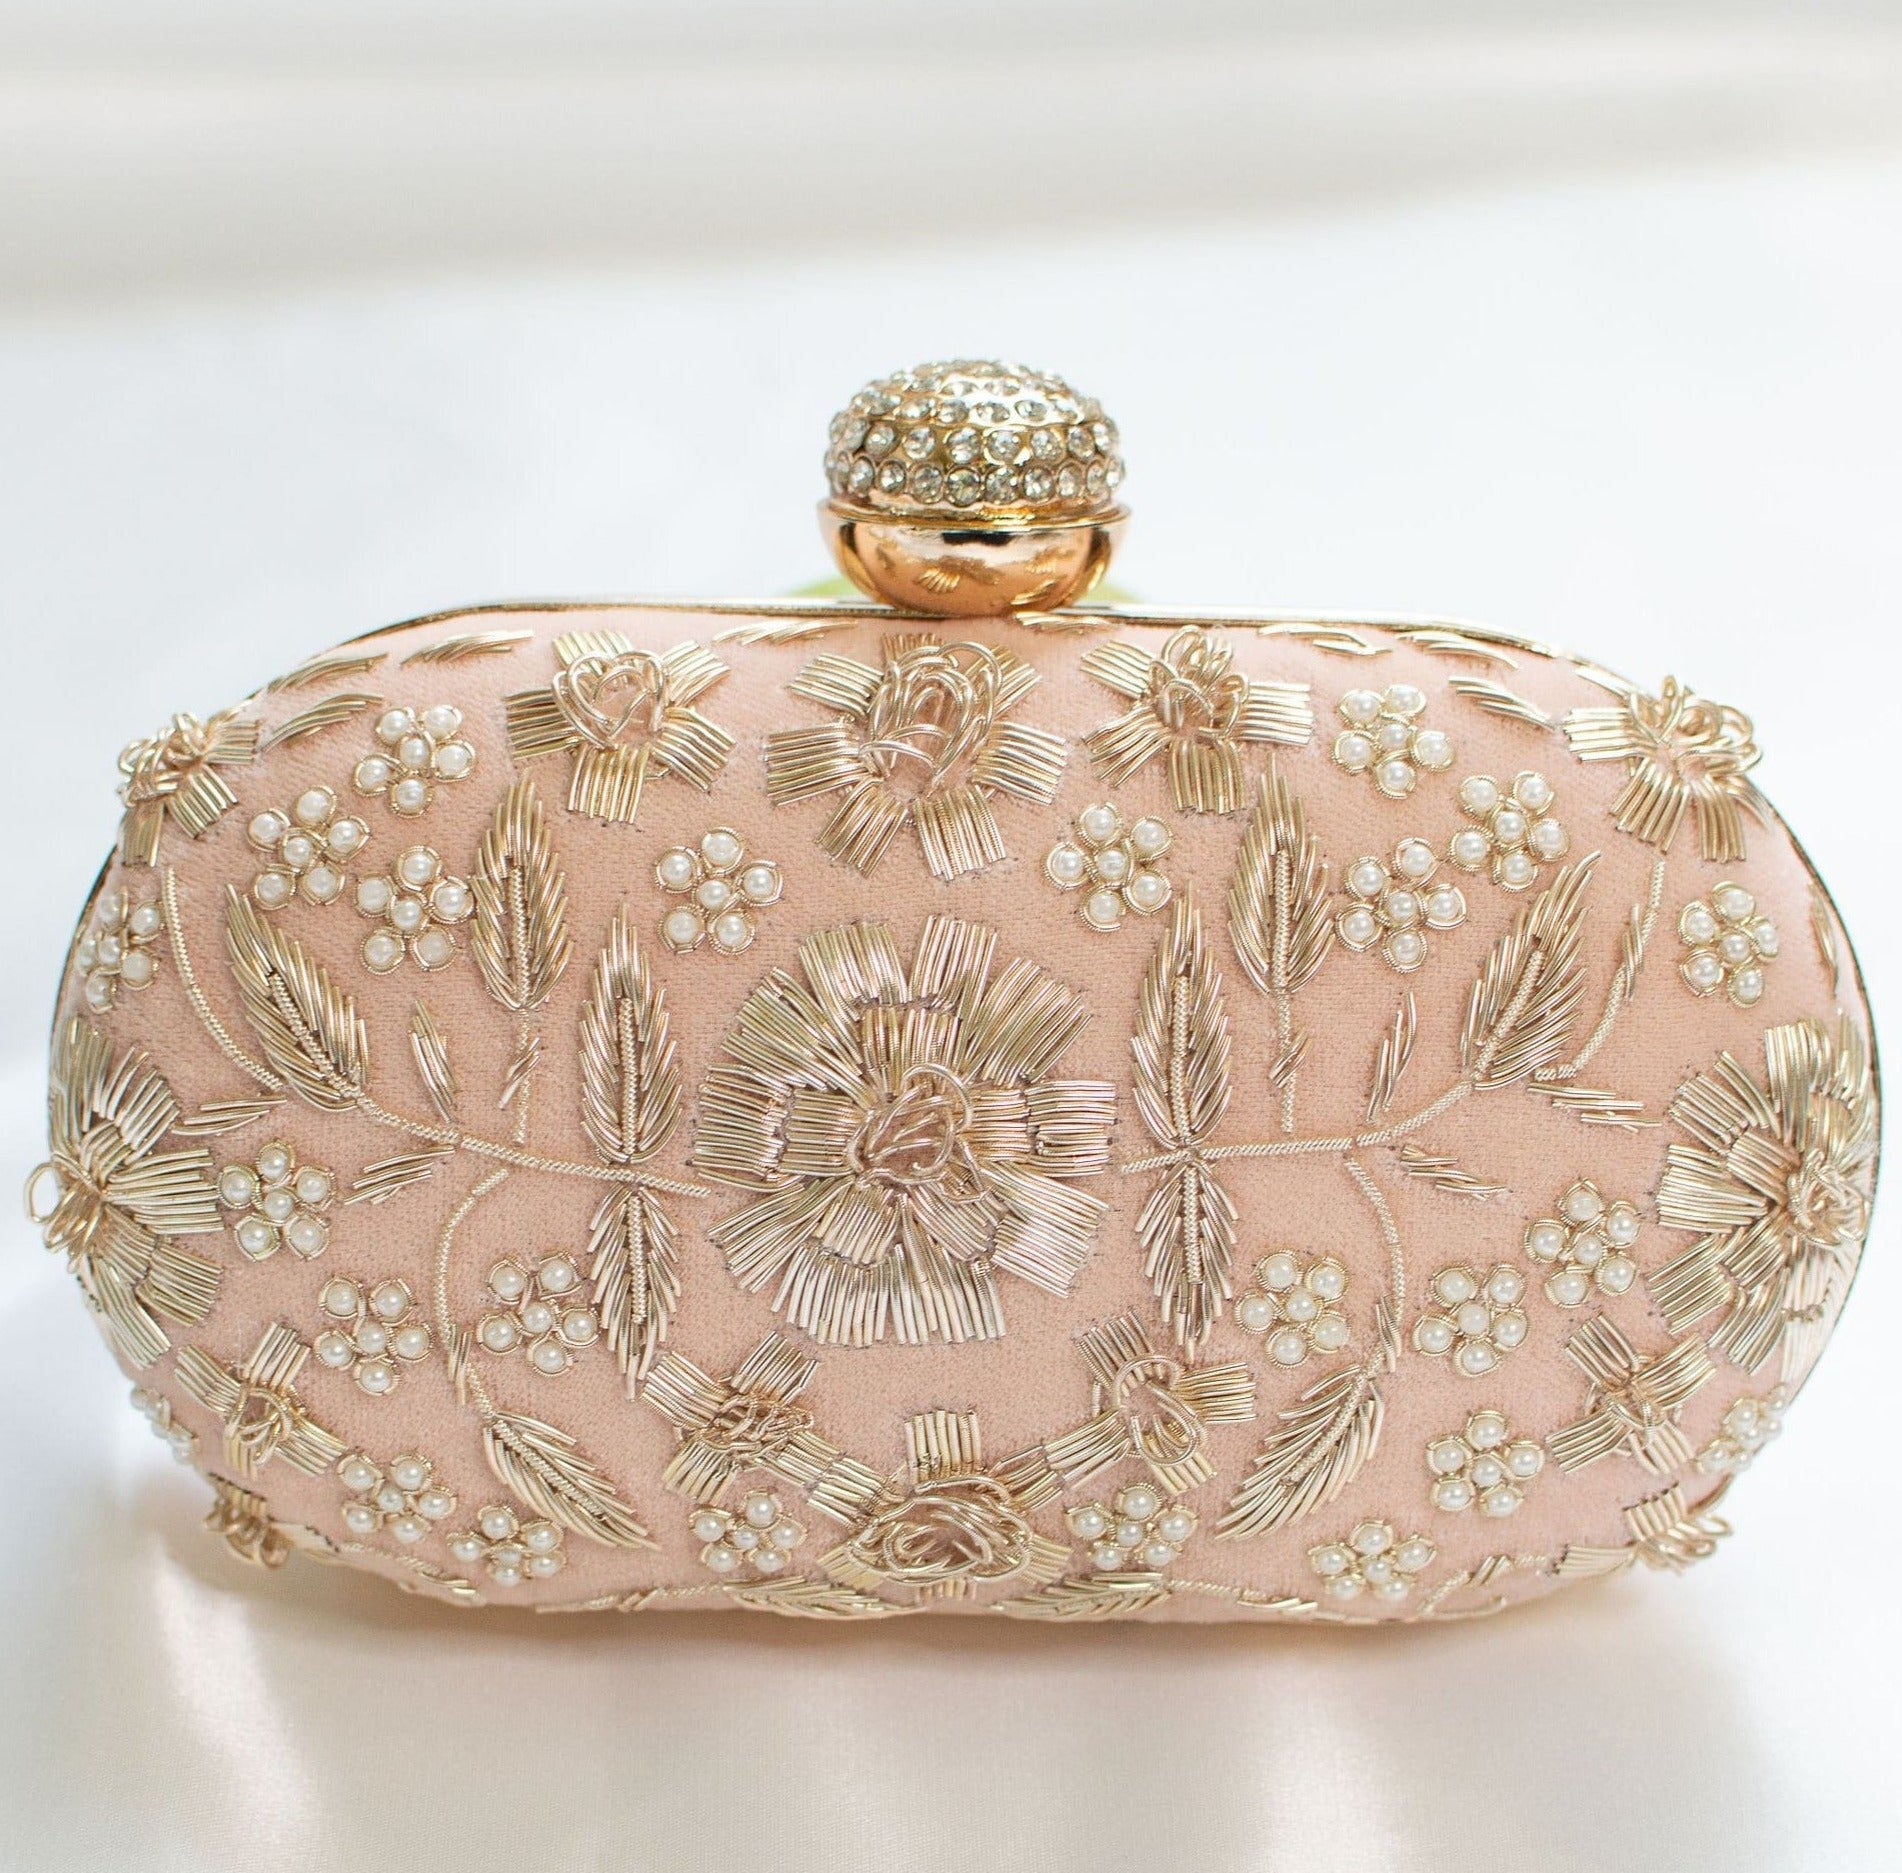 Buy Embroidered Designer Metal Box Clutch With Chain , Hand Bag , Party  Clutch, Clutch Bag for Women , Wedding Clutch, Favor Gift Bag Online in  India - Etsy | Wedding clutch,